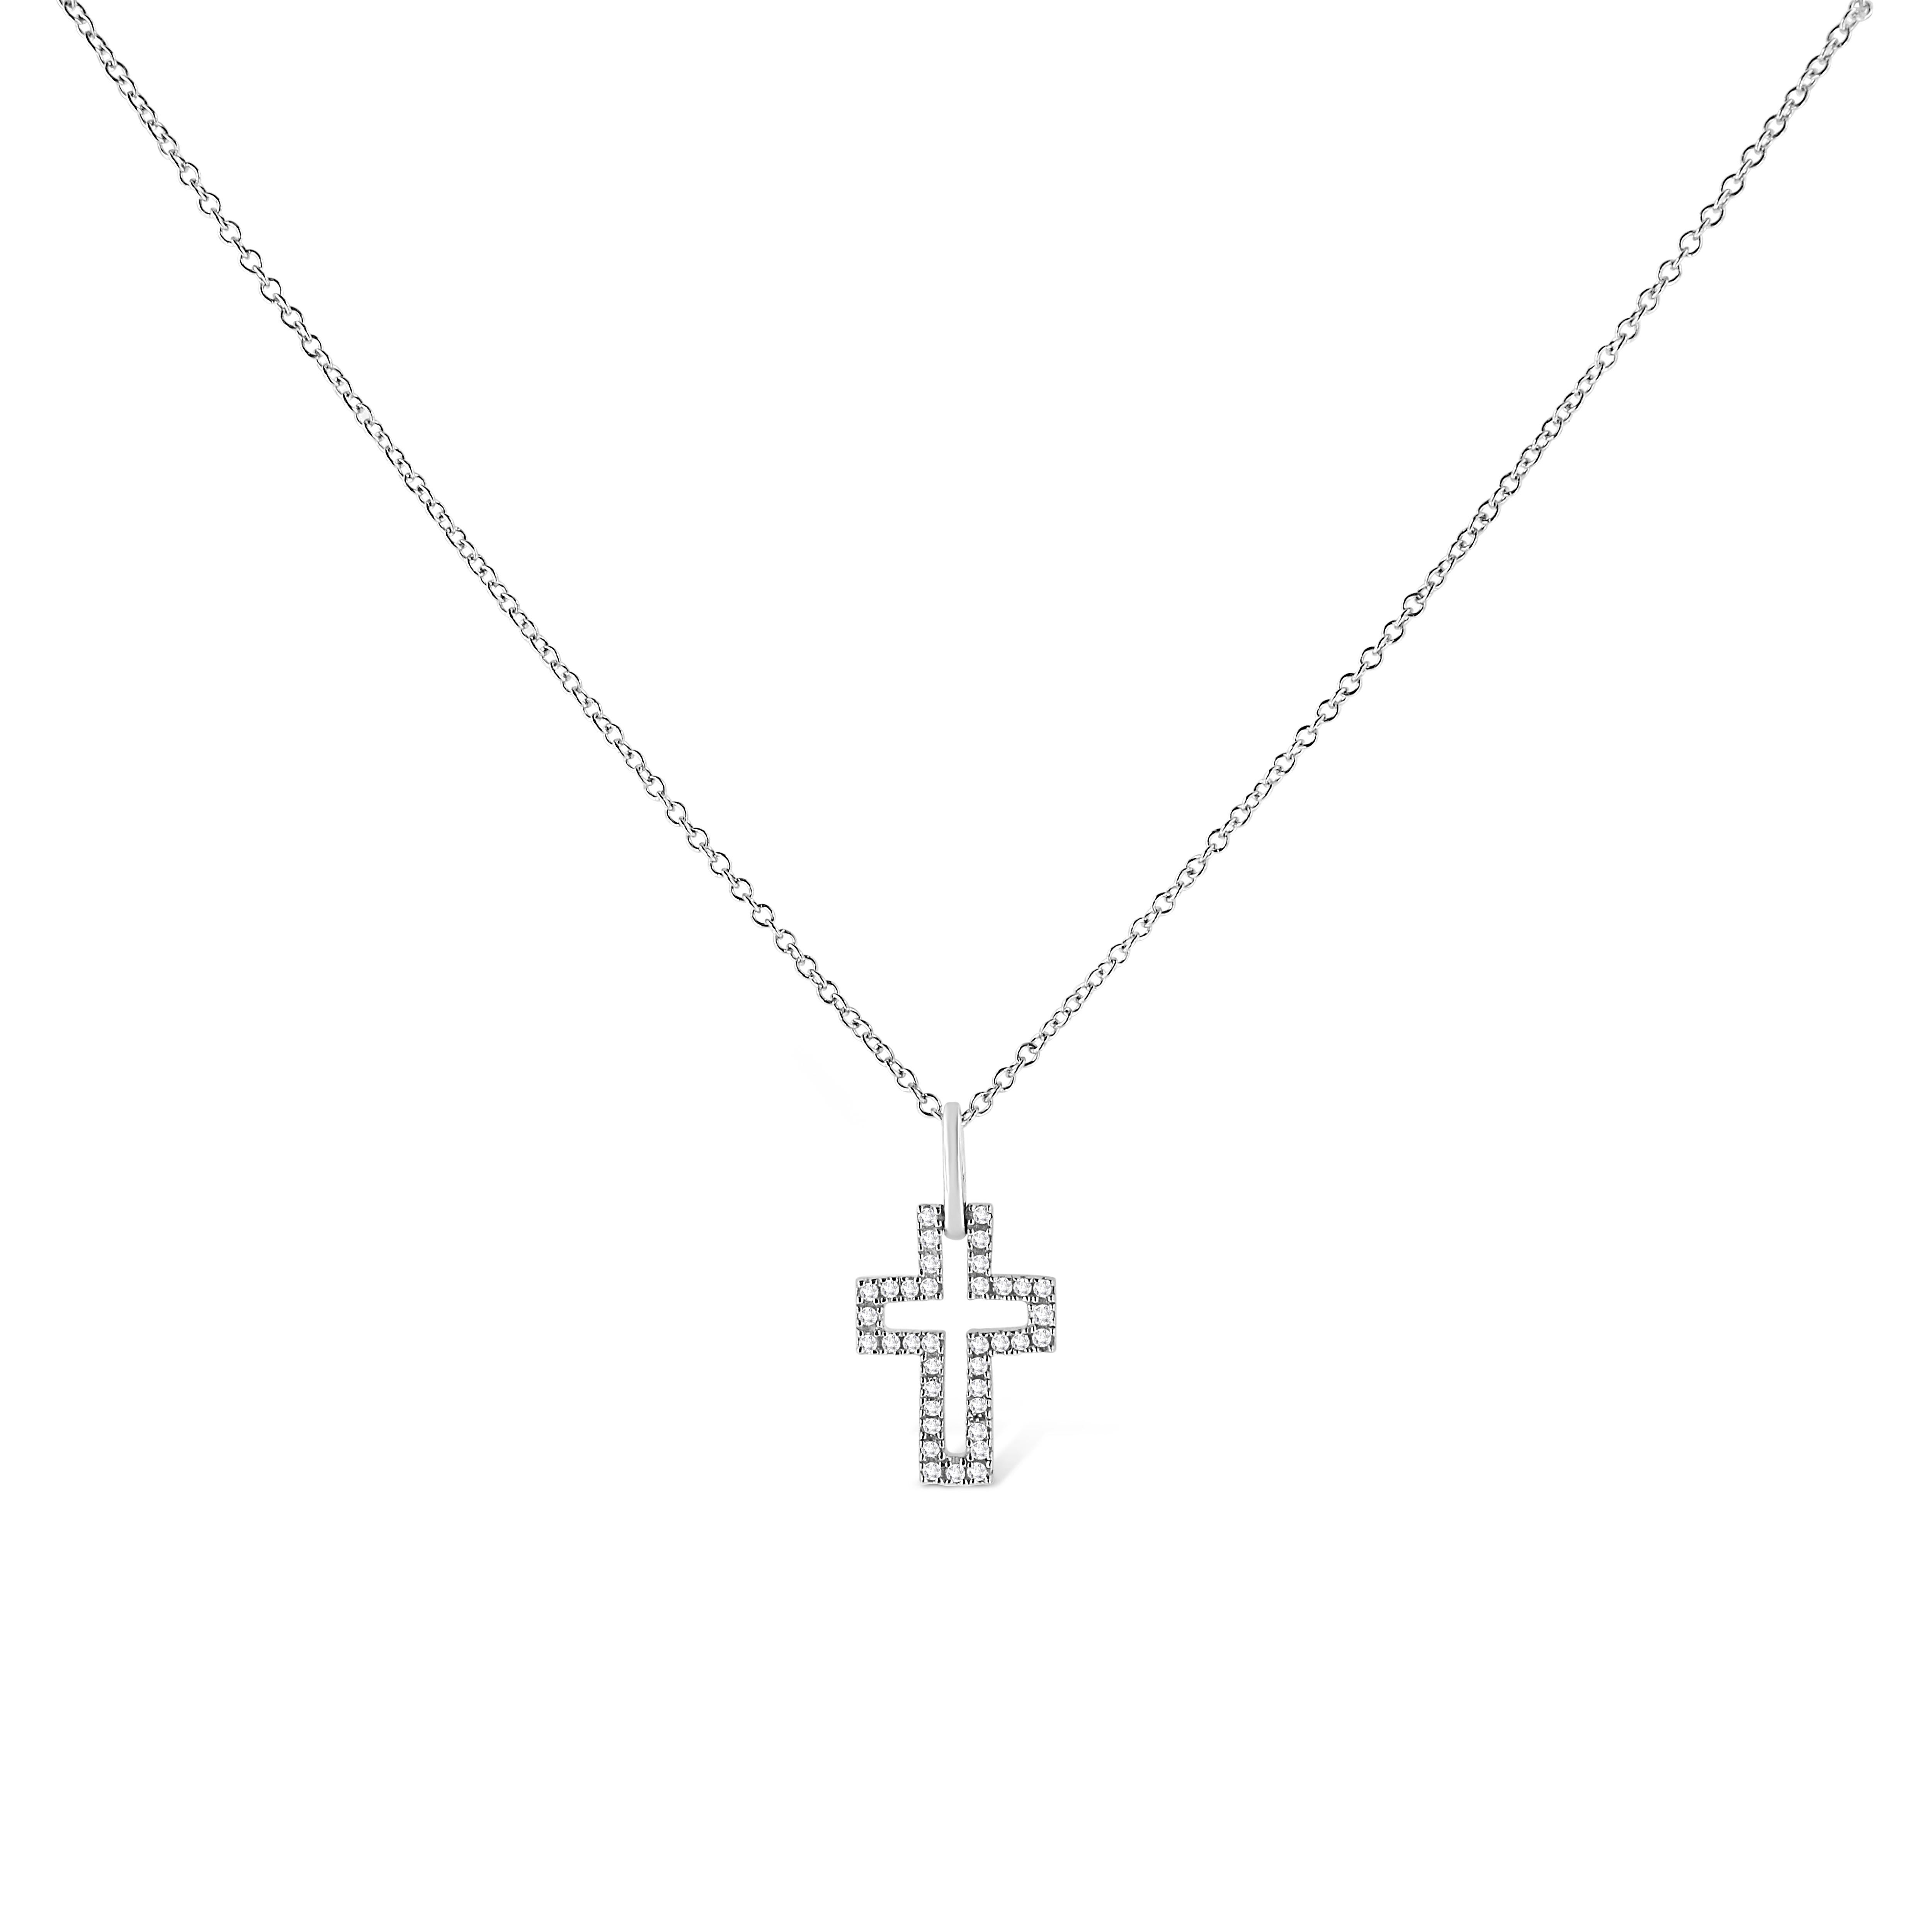 Express your true love for God with this elegant diamond cross pendant. This sleekly crafted sterling silver diamond pendant features 37 scintillating round diamonds accented by round cut diamonds. All diamonds are in pave setting. This pendant